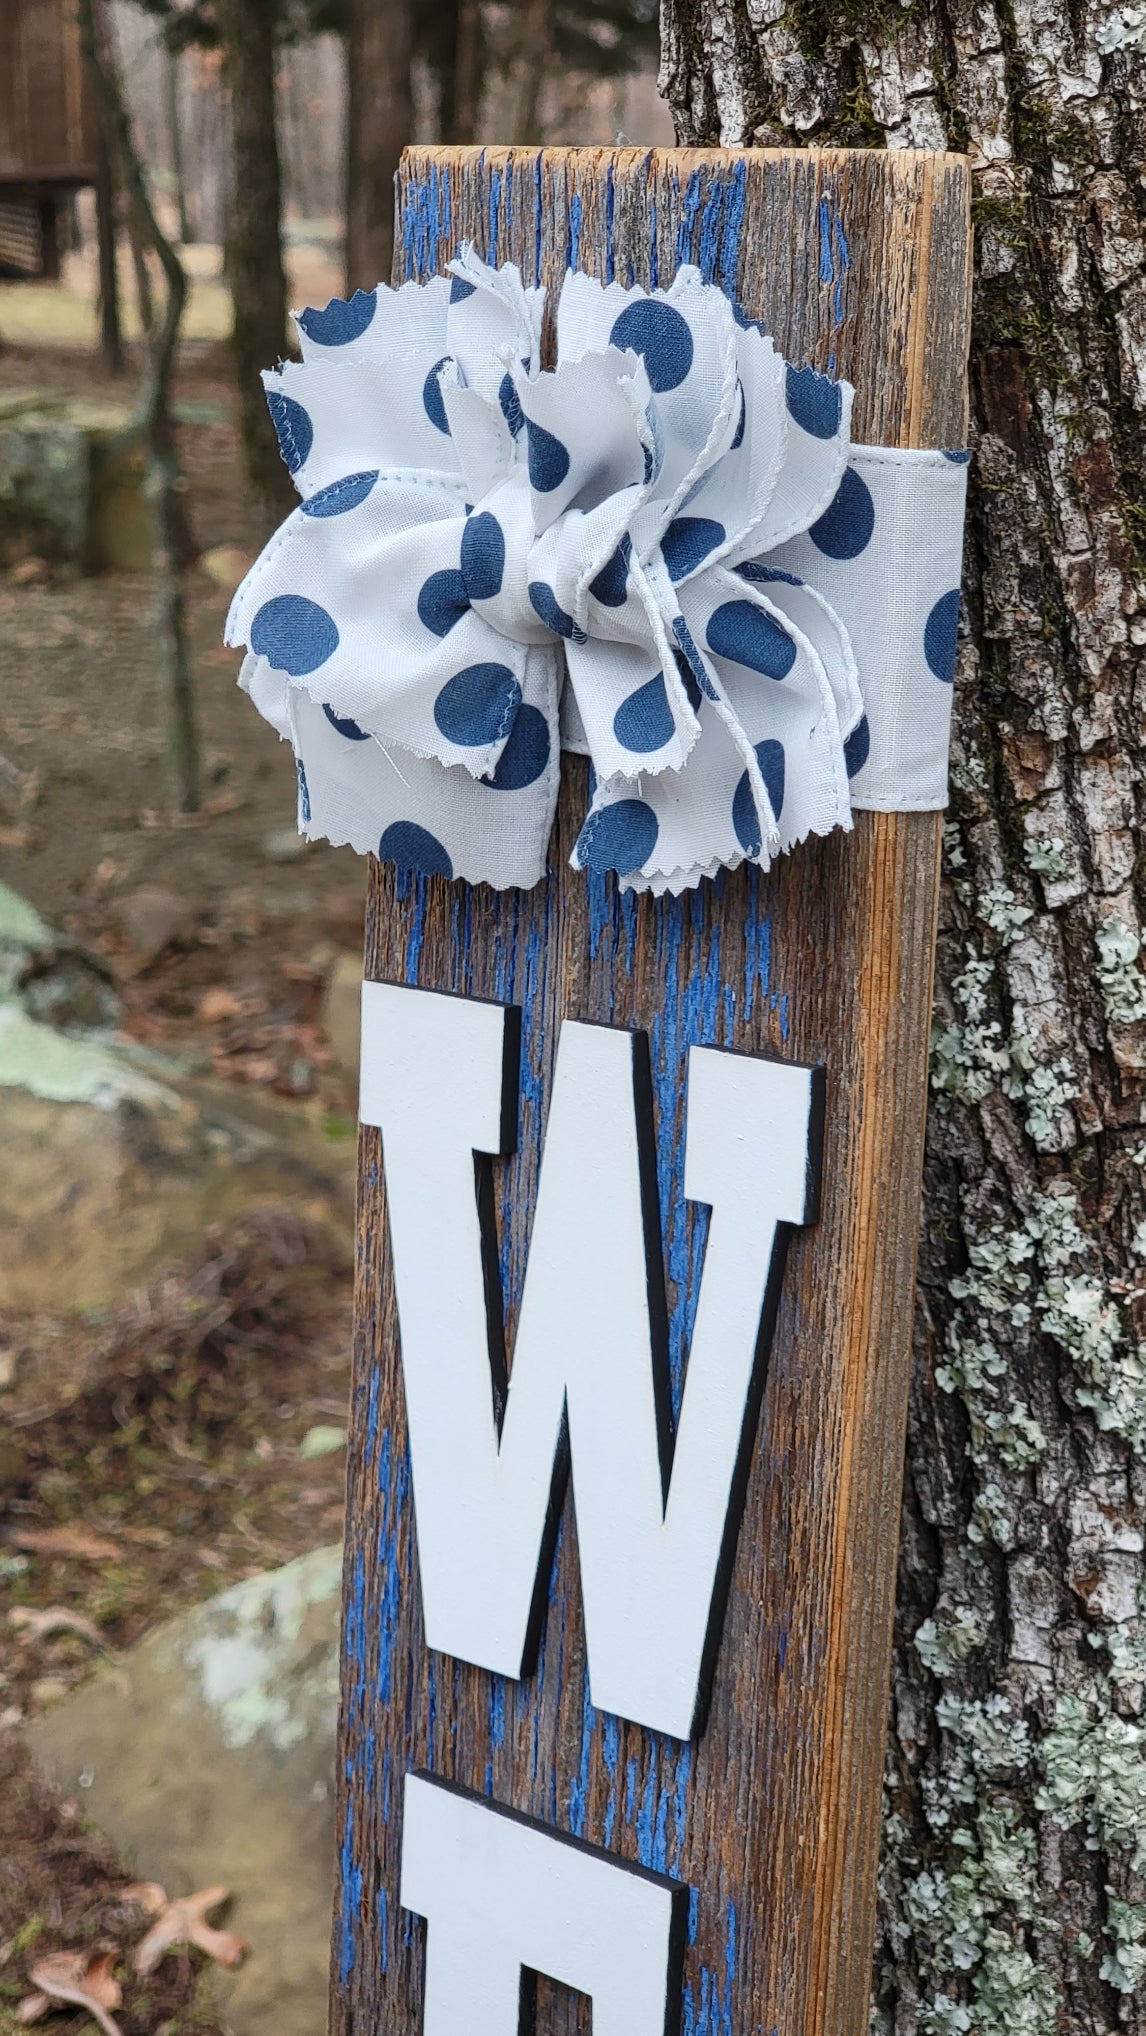 Rustic Welcome Sign w/Bow